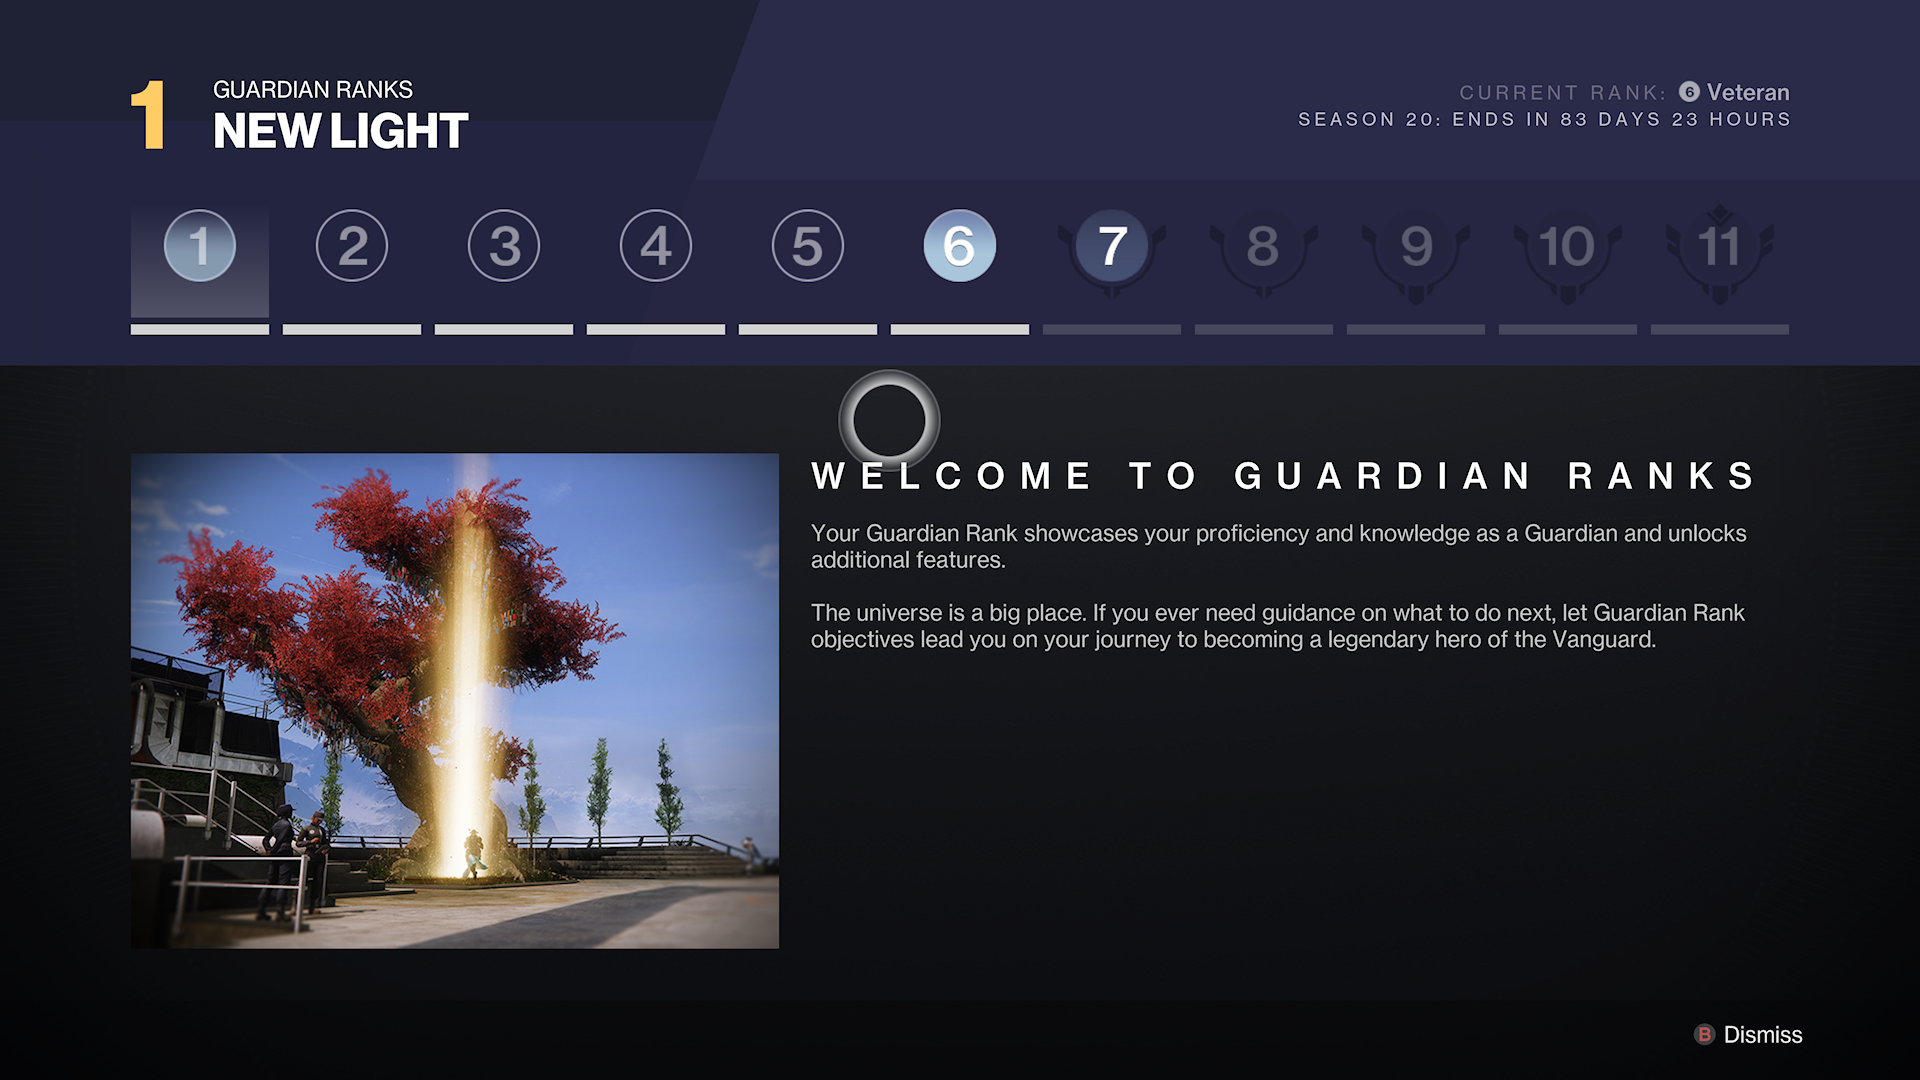 Destiny 2 Lightfall - the Guardian Ranks welcome screen showing 11 levels